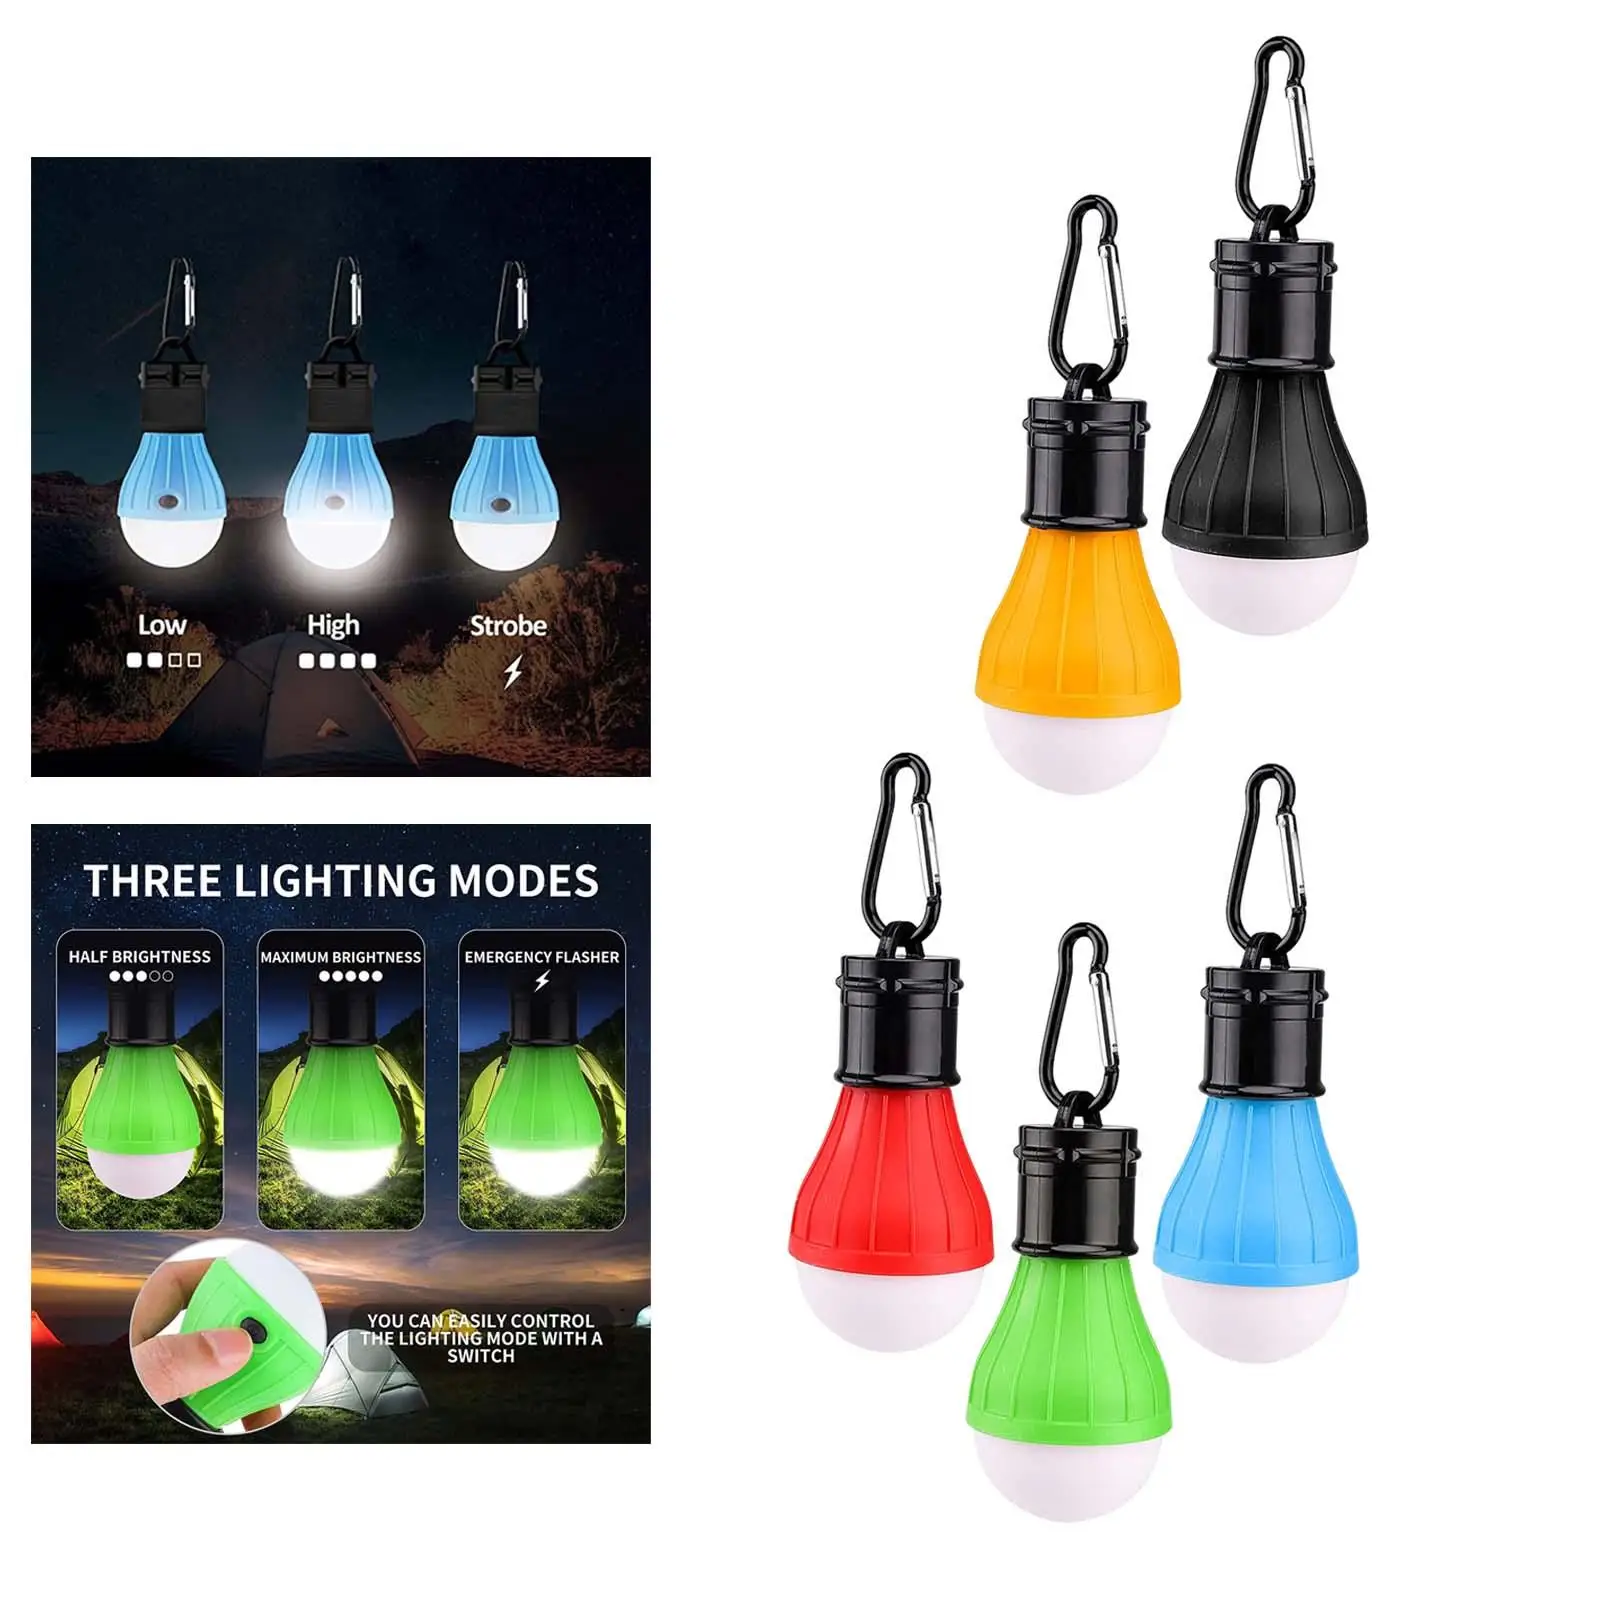 5Pcs Camping Lantern Light Tent Lamp Waterproof 3 Modes with Carabiner Clips Hanging Battery Powered for Car Repairing Indoor